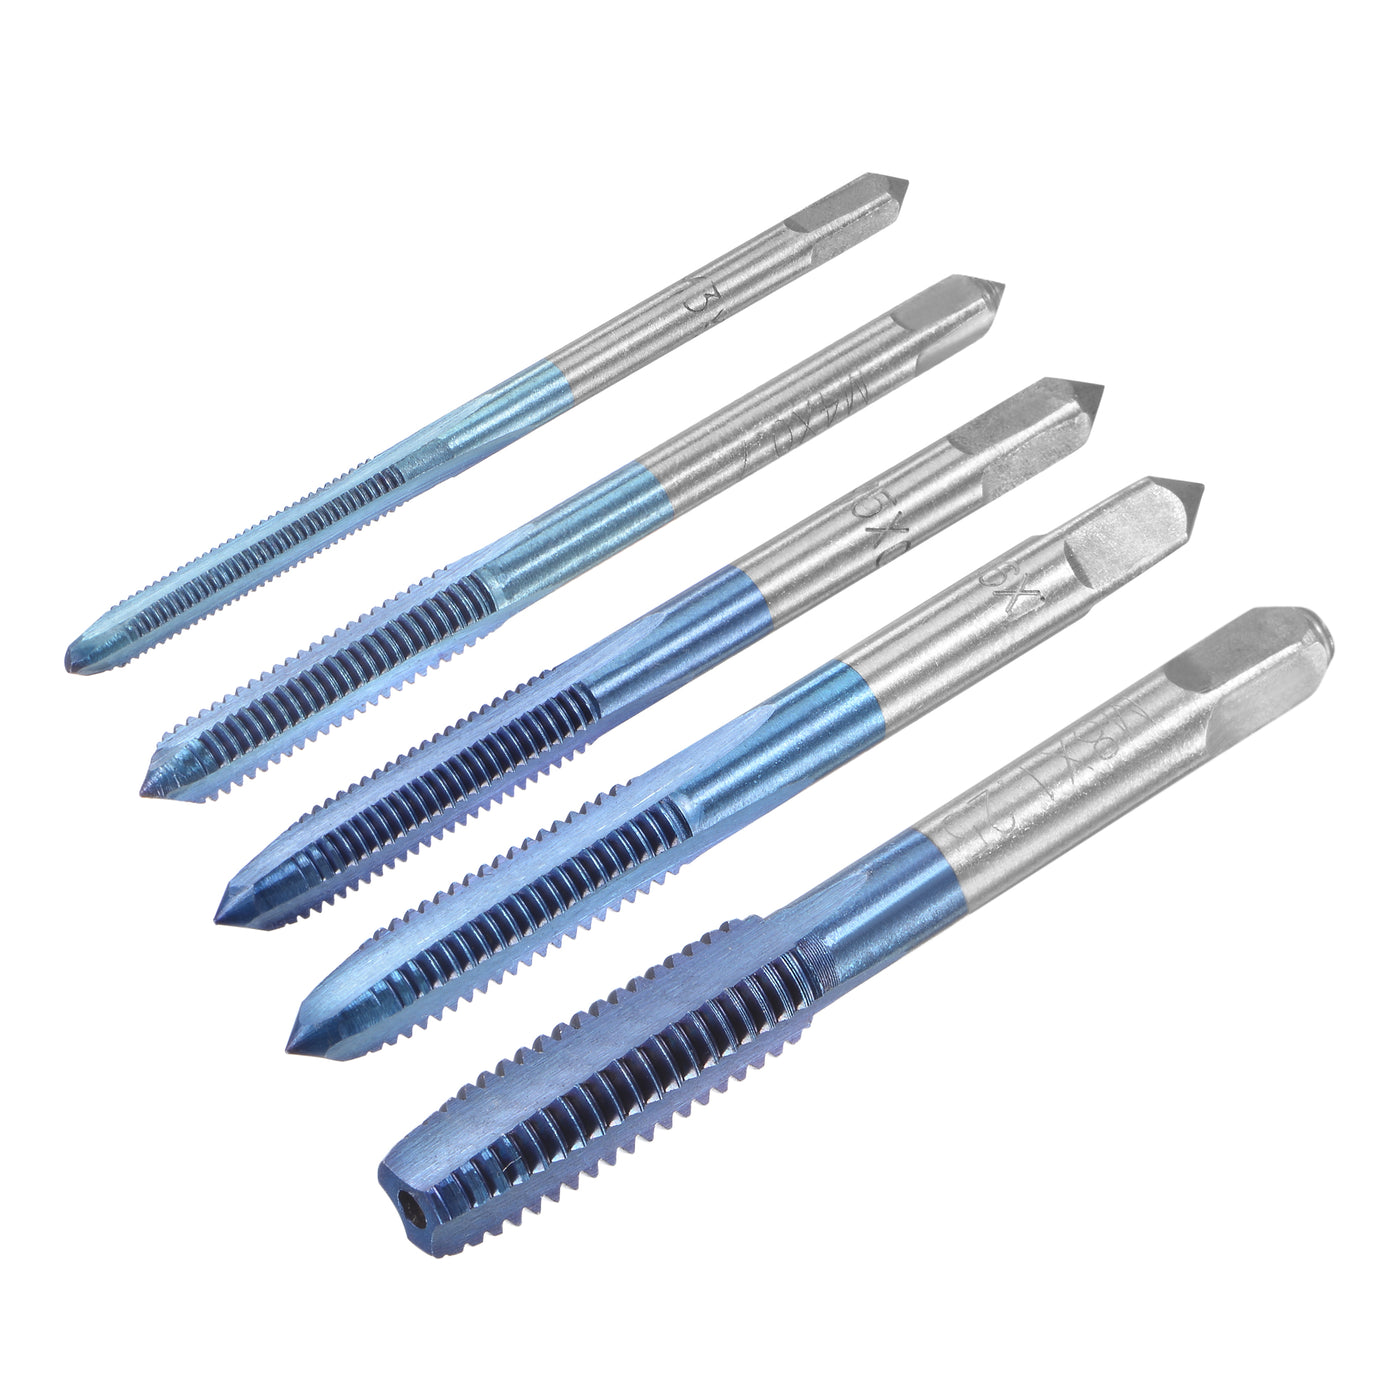 Uxcell Uxcell M3 M4 M5 M6 M8 Hand Threading Tap Set High Speed Steel Straight Flutes Metric Thread Screw Taps Bluing 5pcs